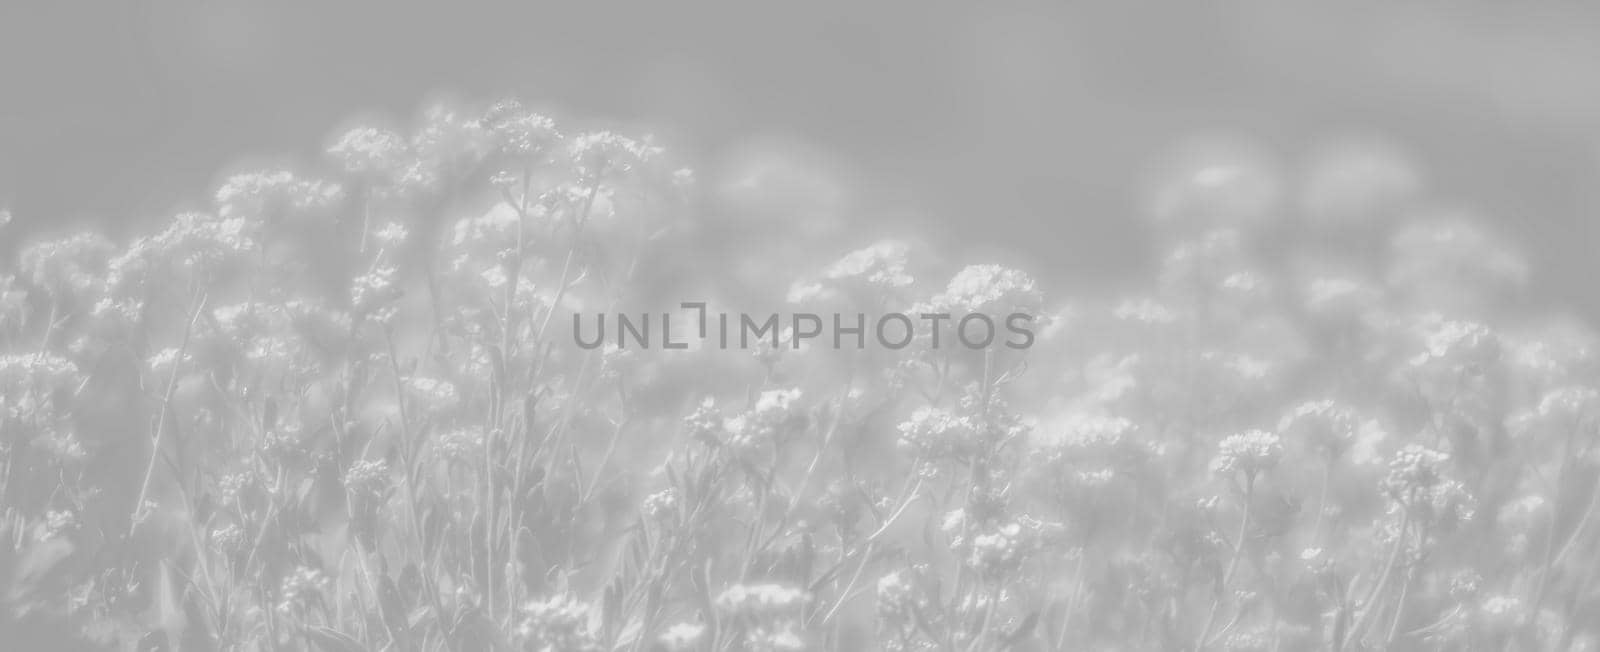 Natural background and texture. Soft focus image of small flowers of aurinia saxatilis in light gray tonality